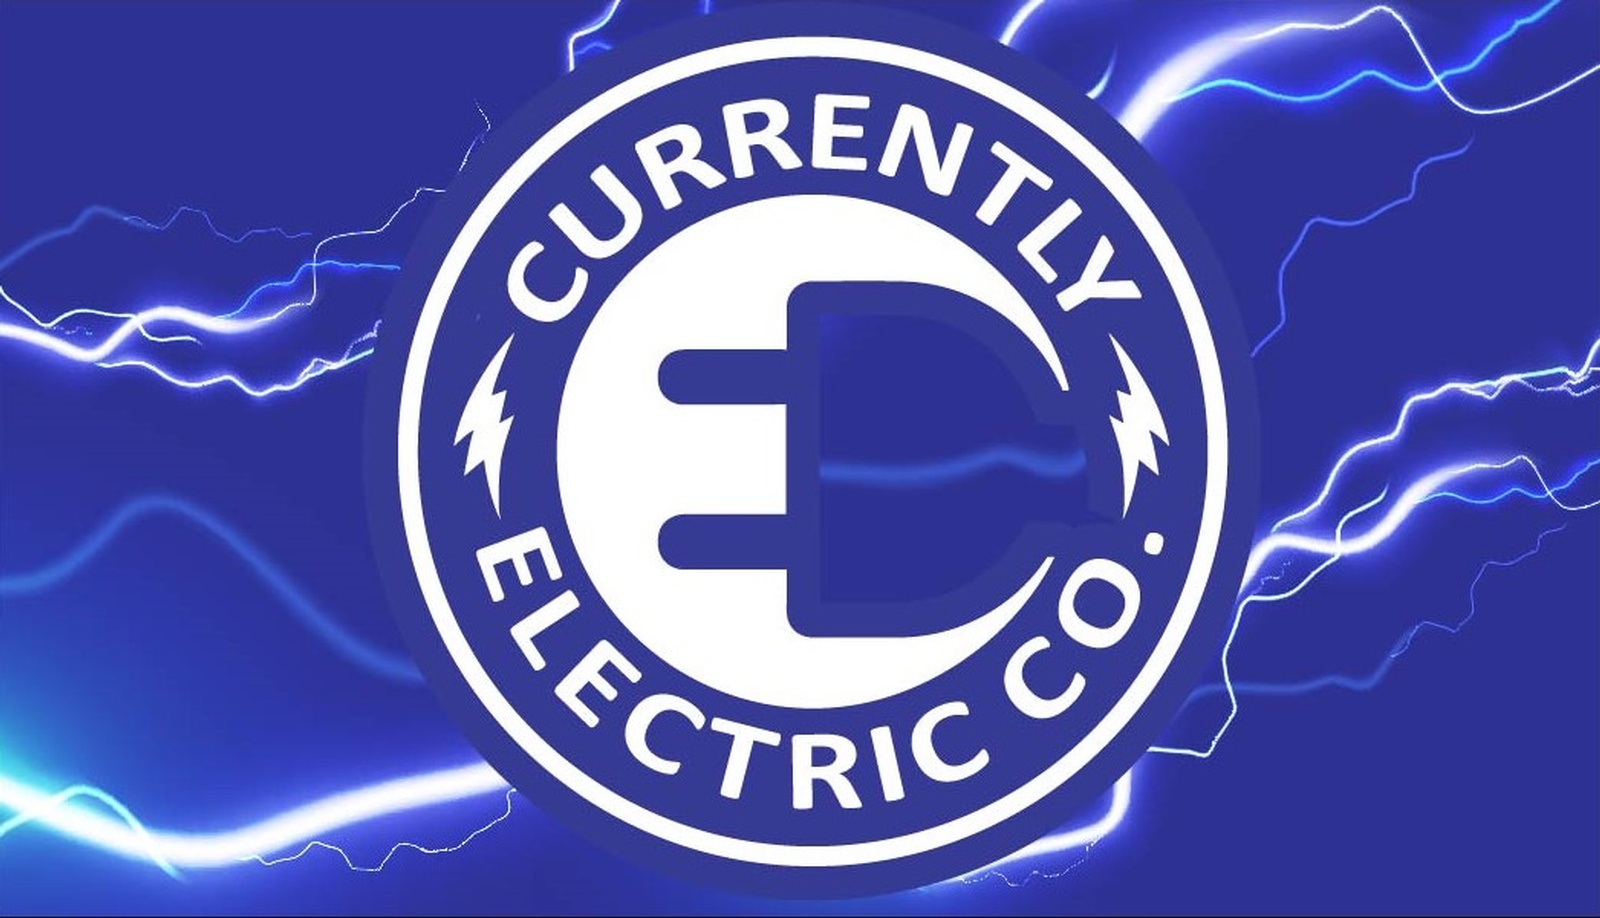 CURRENTLY ELECTRIC CO. logo